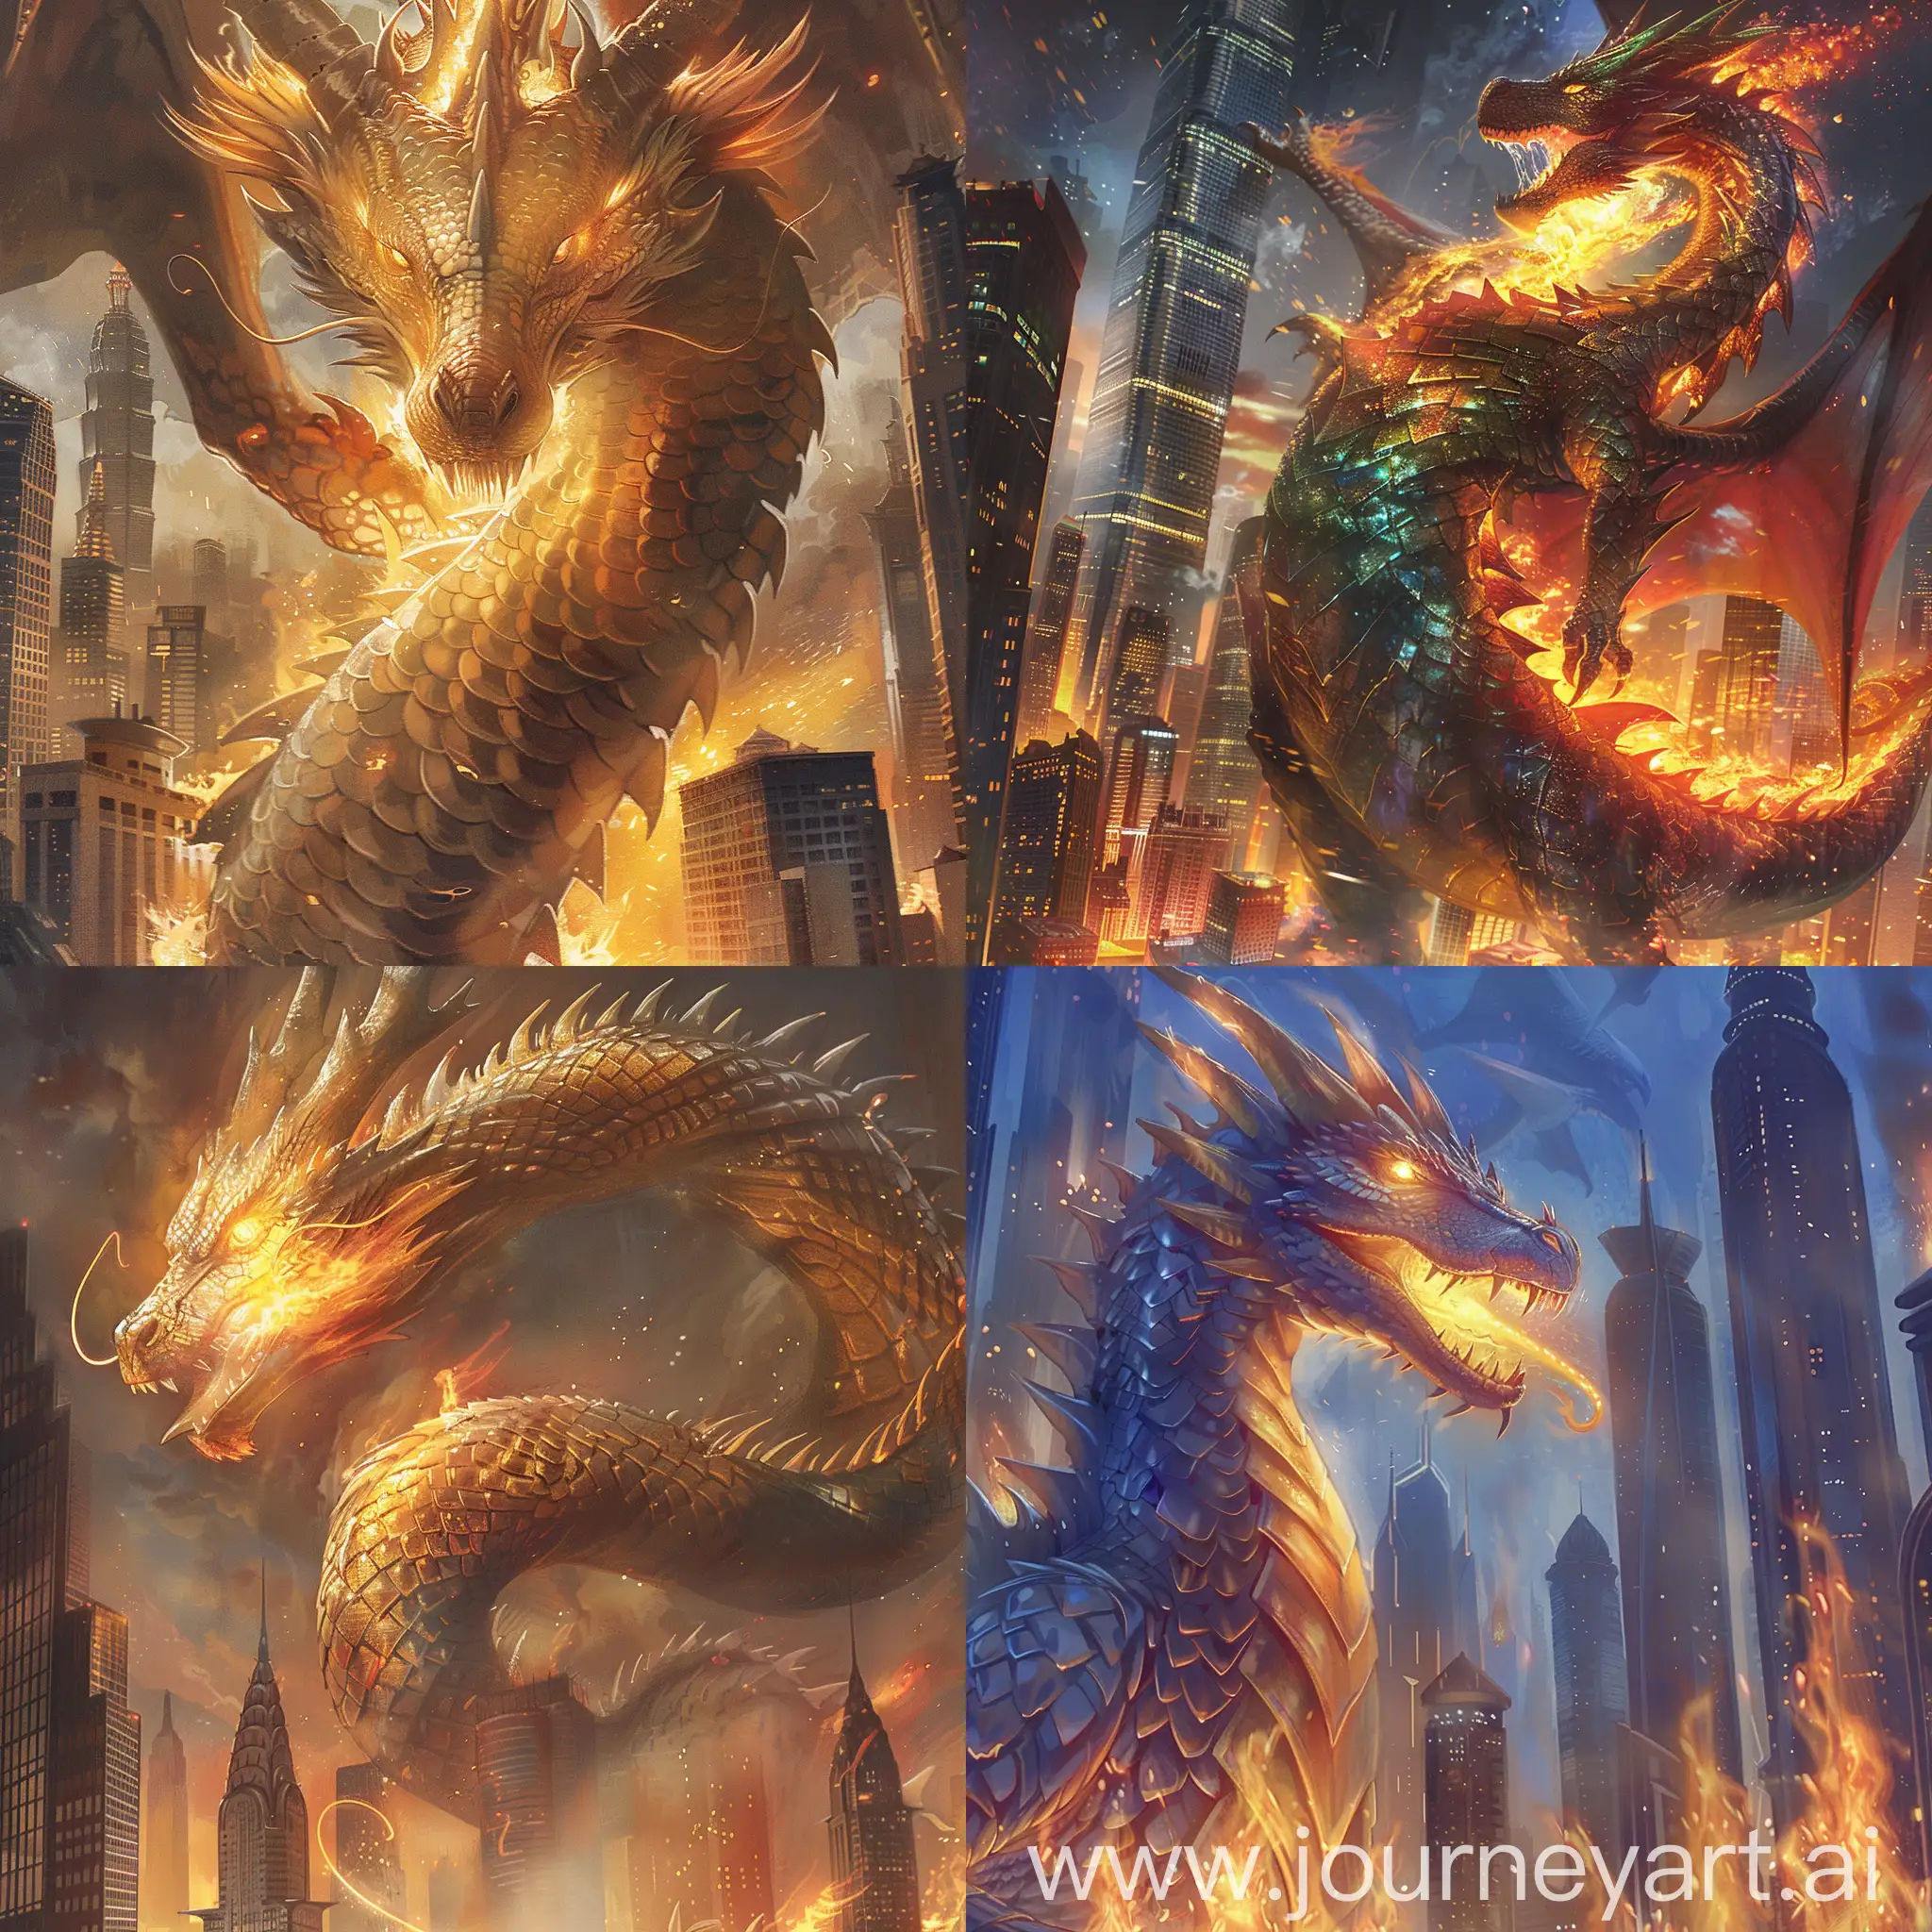 towering dragon with scales reflecting the glimmer of skyscrapers, exhaling flames infused with the spirit of invention and the mosaic of cultures.